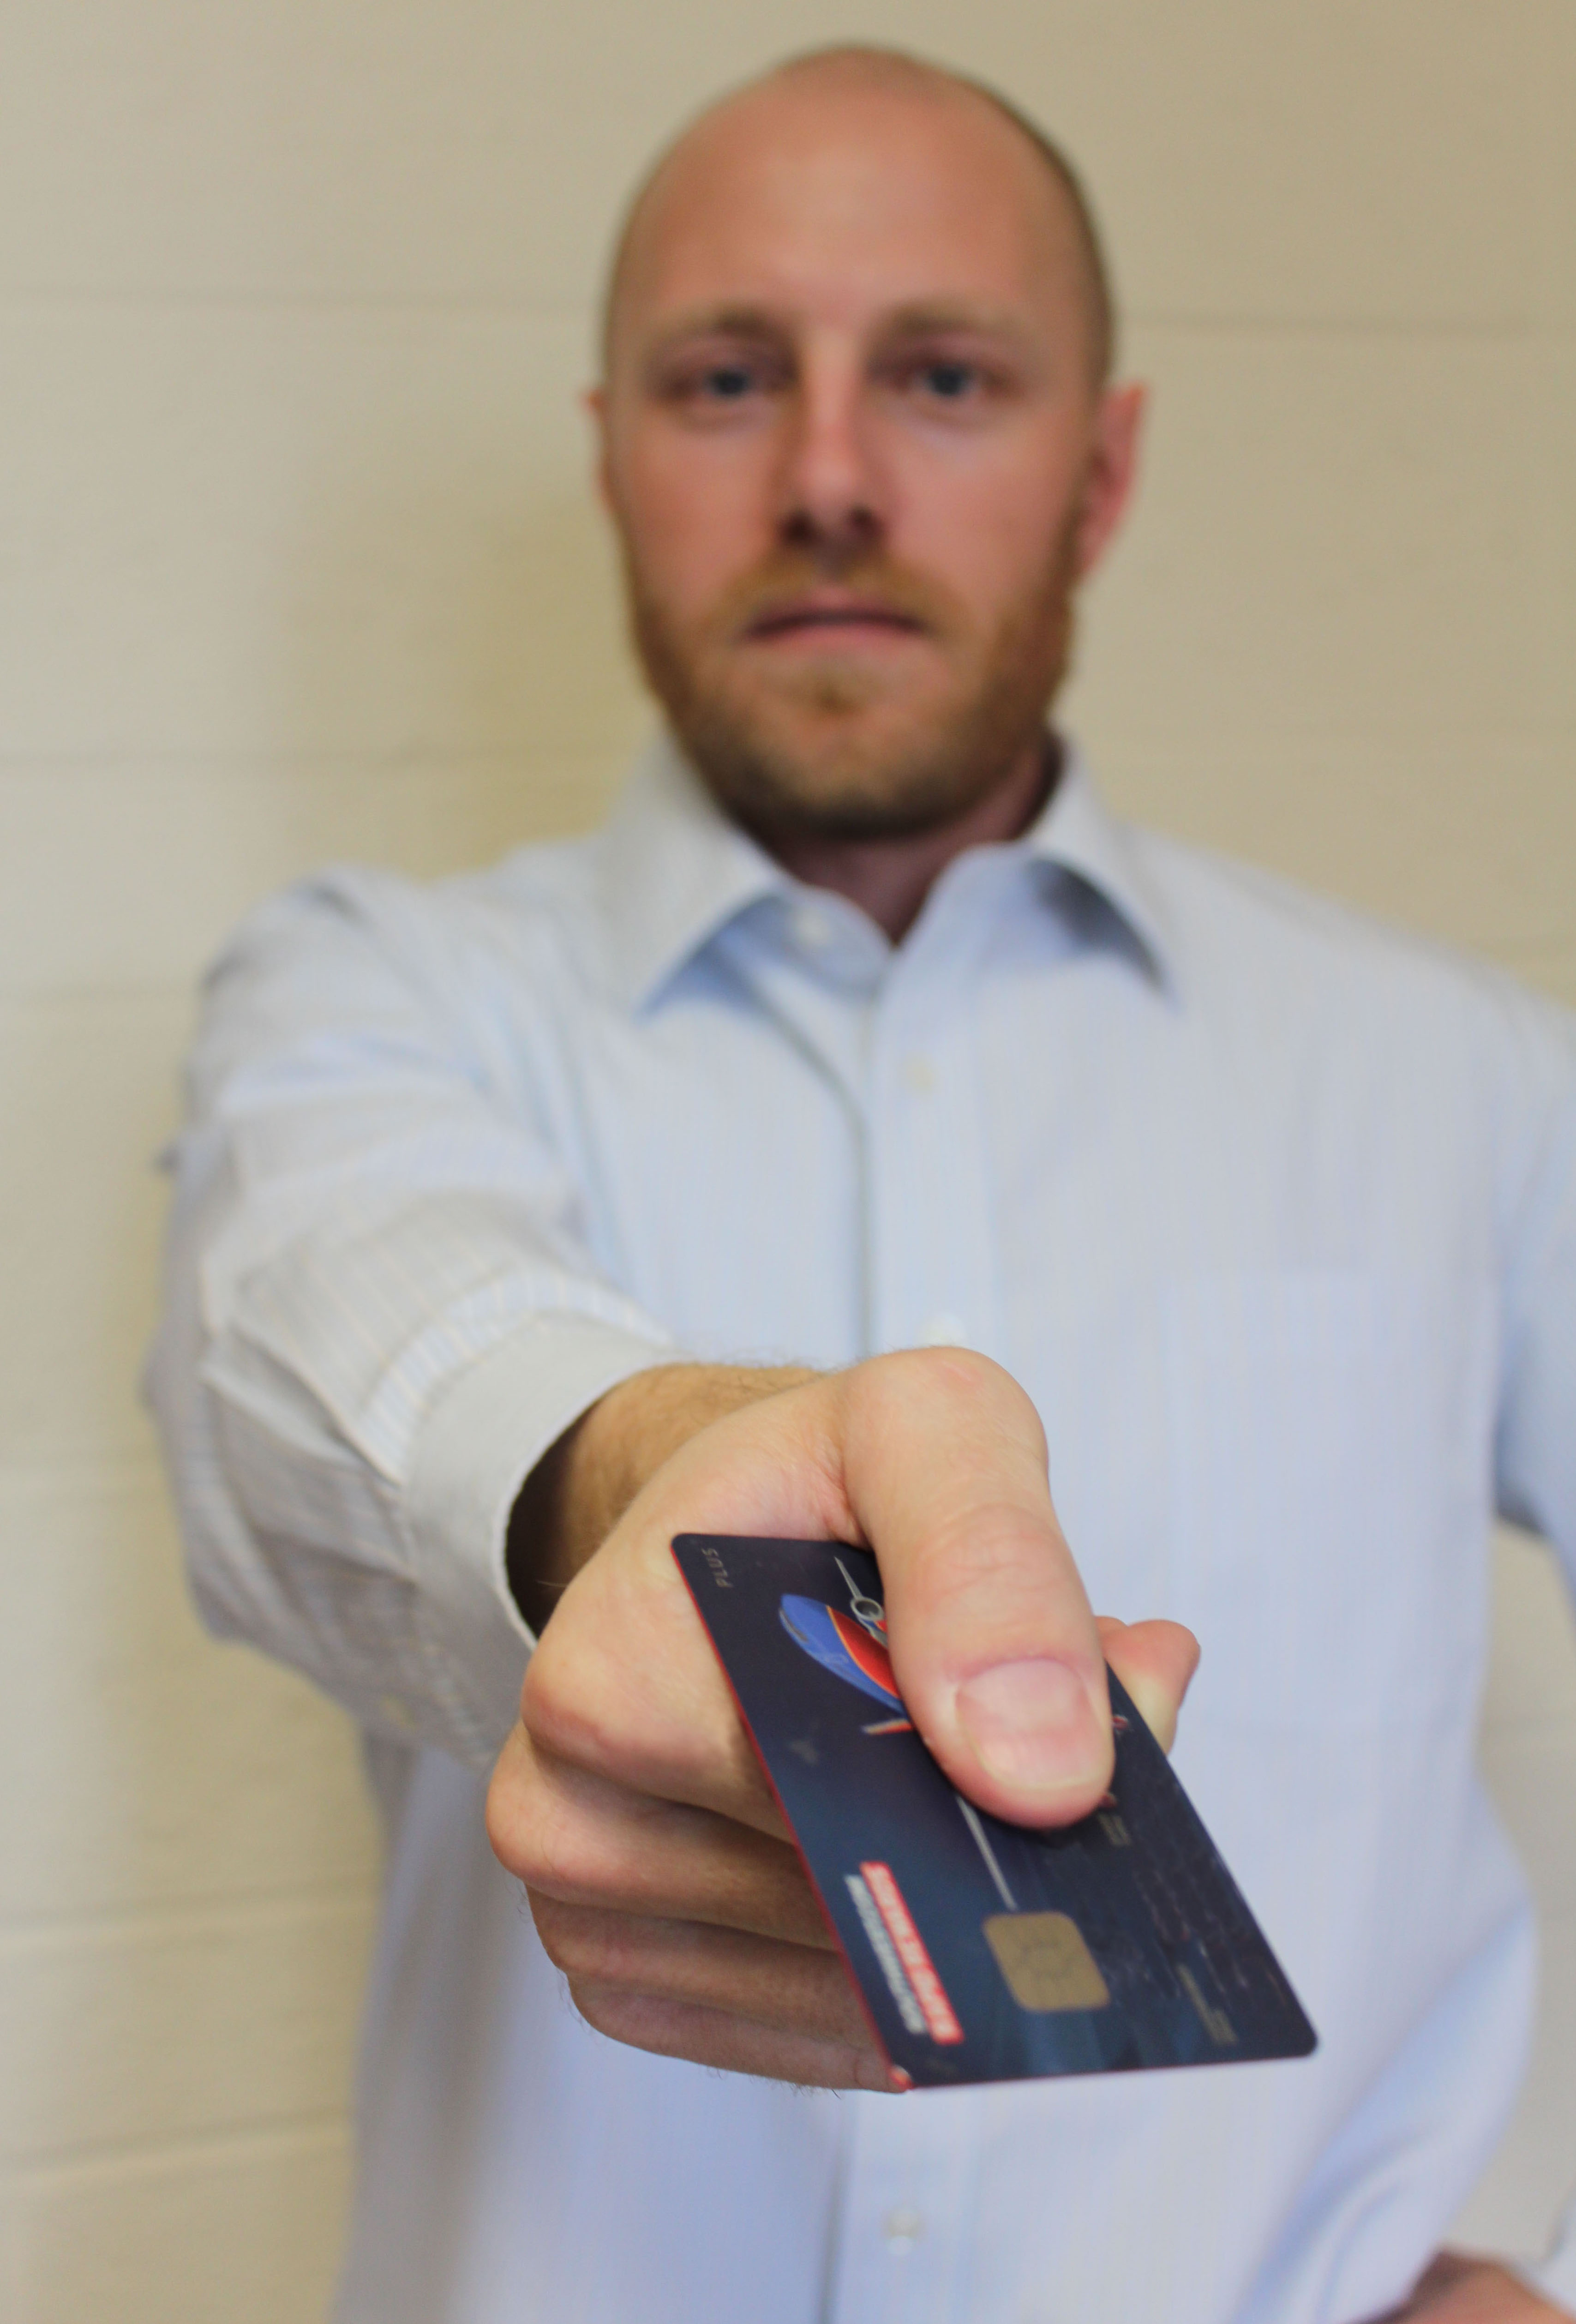 Man holds a credit card with a chip on it.